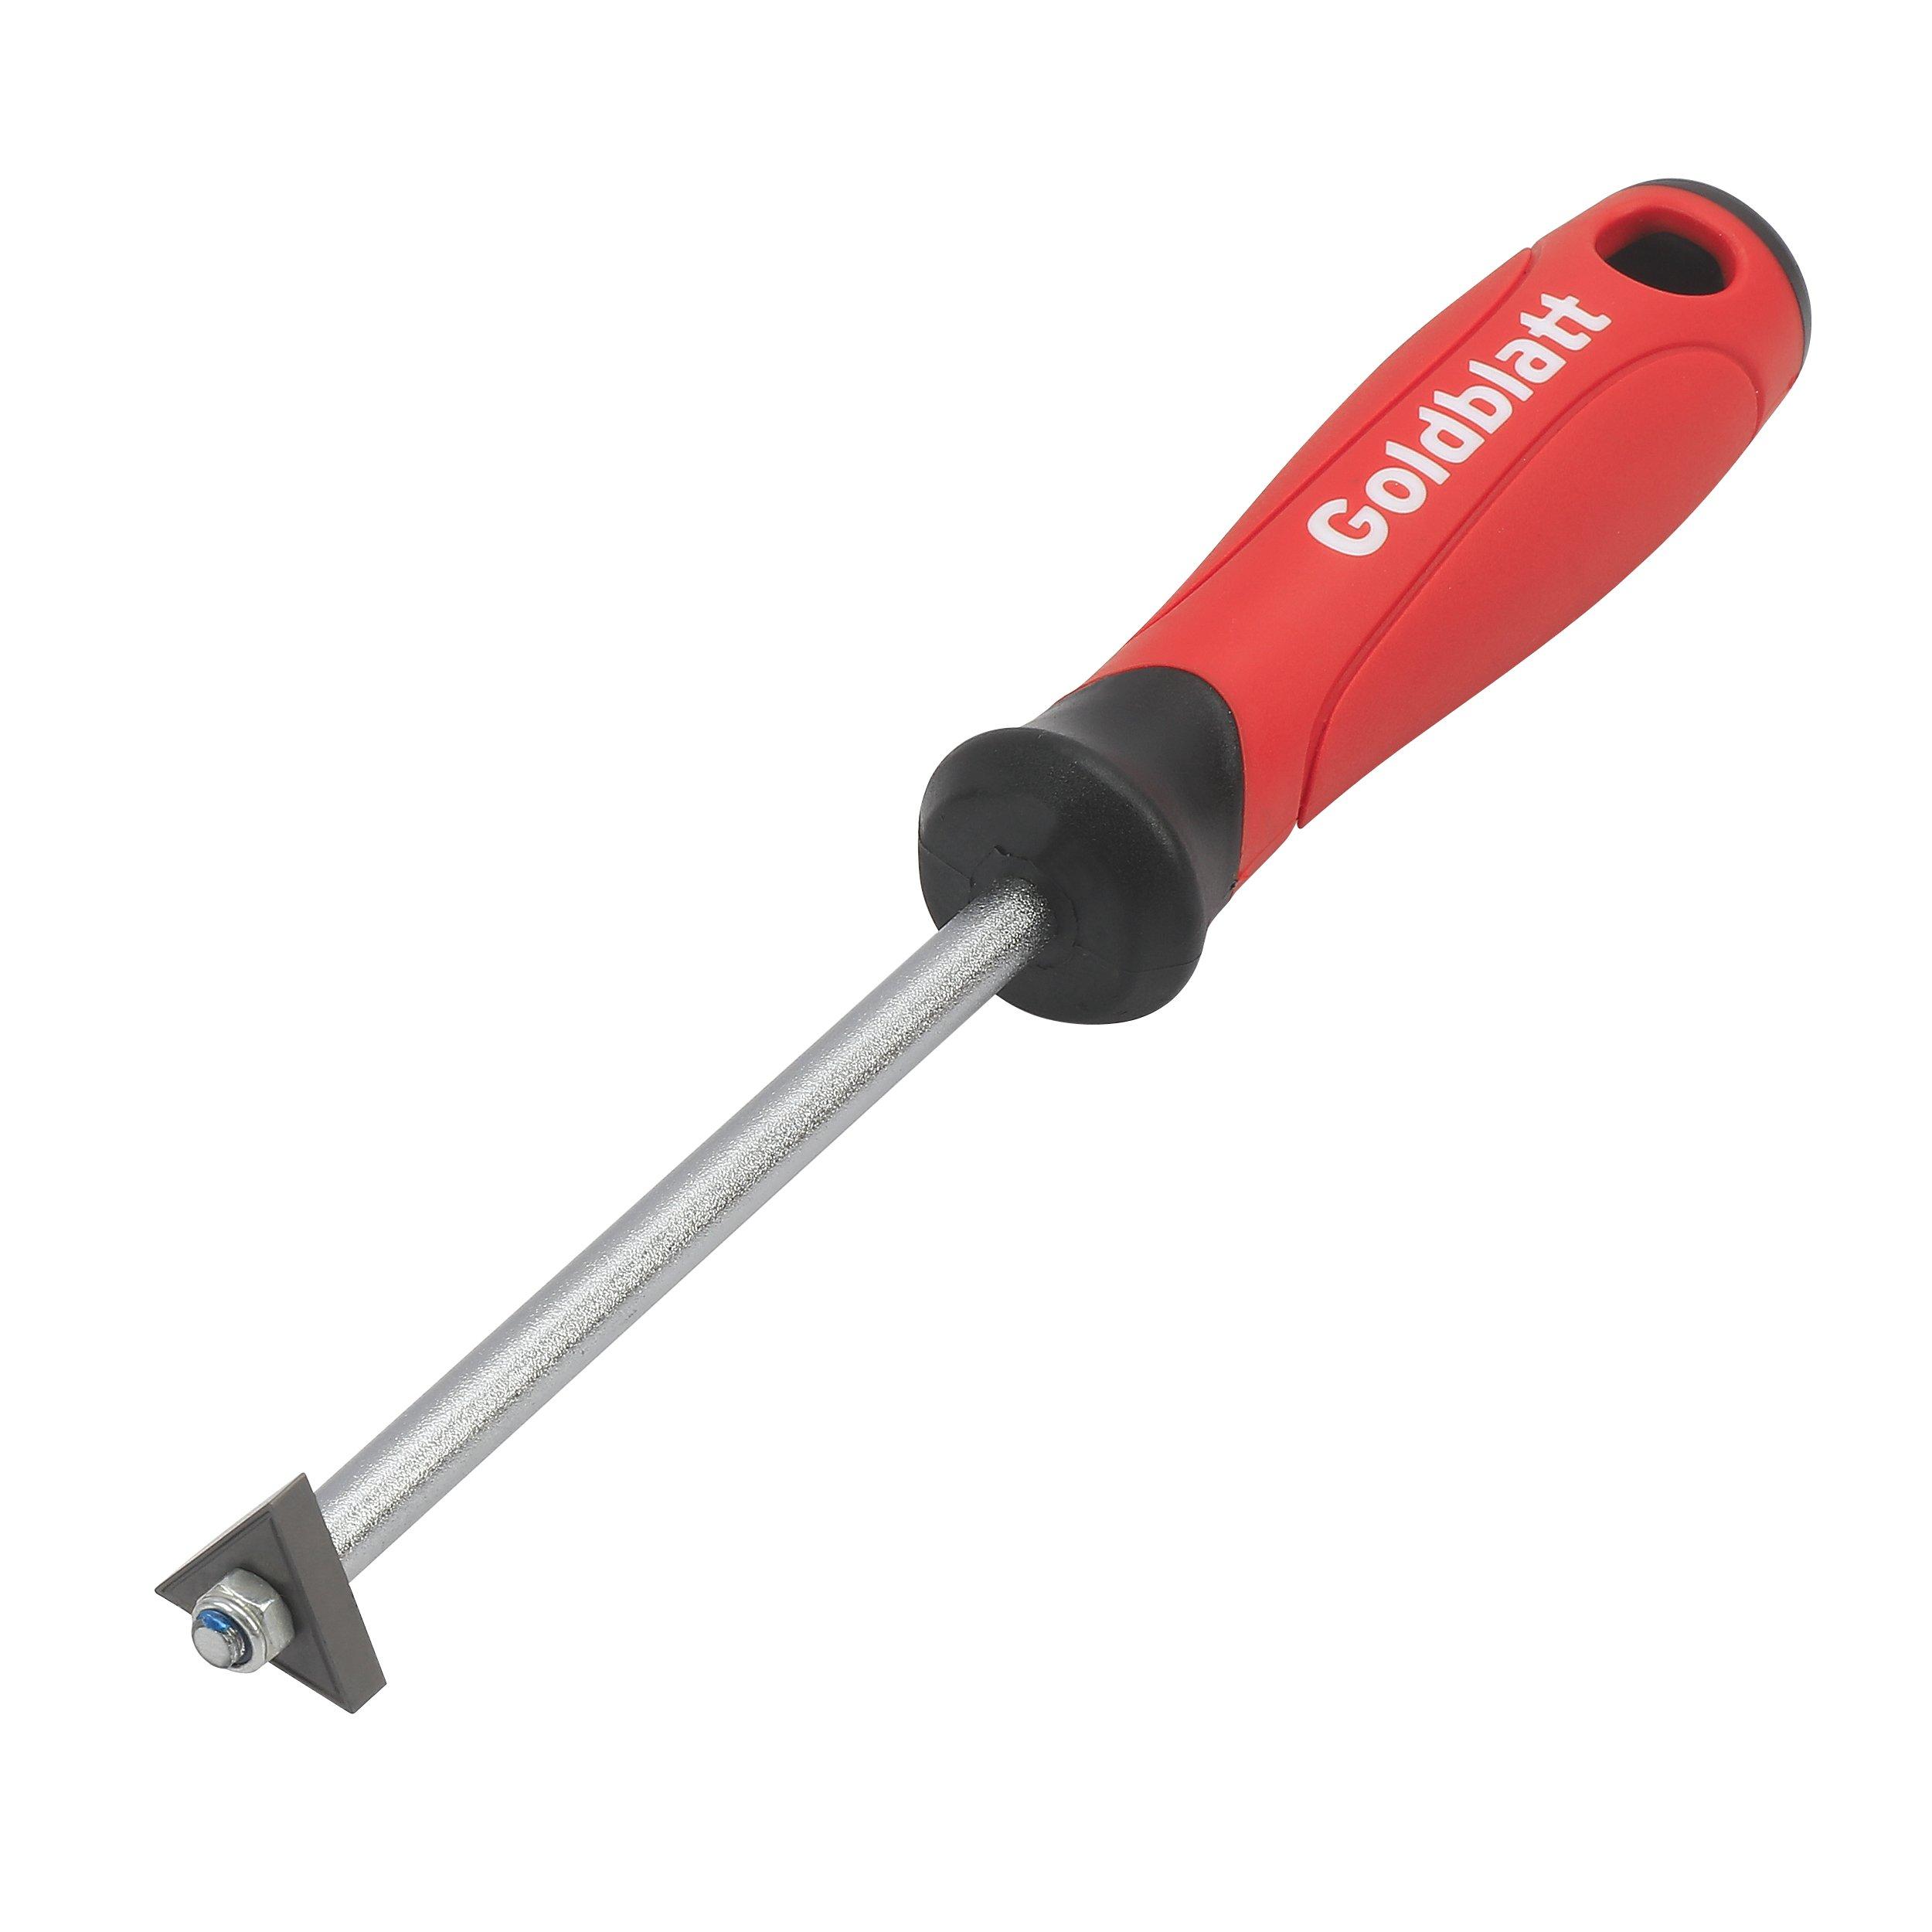 Goldblatt Grout Removal Tool with 2 Tips